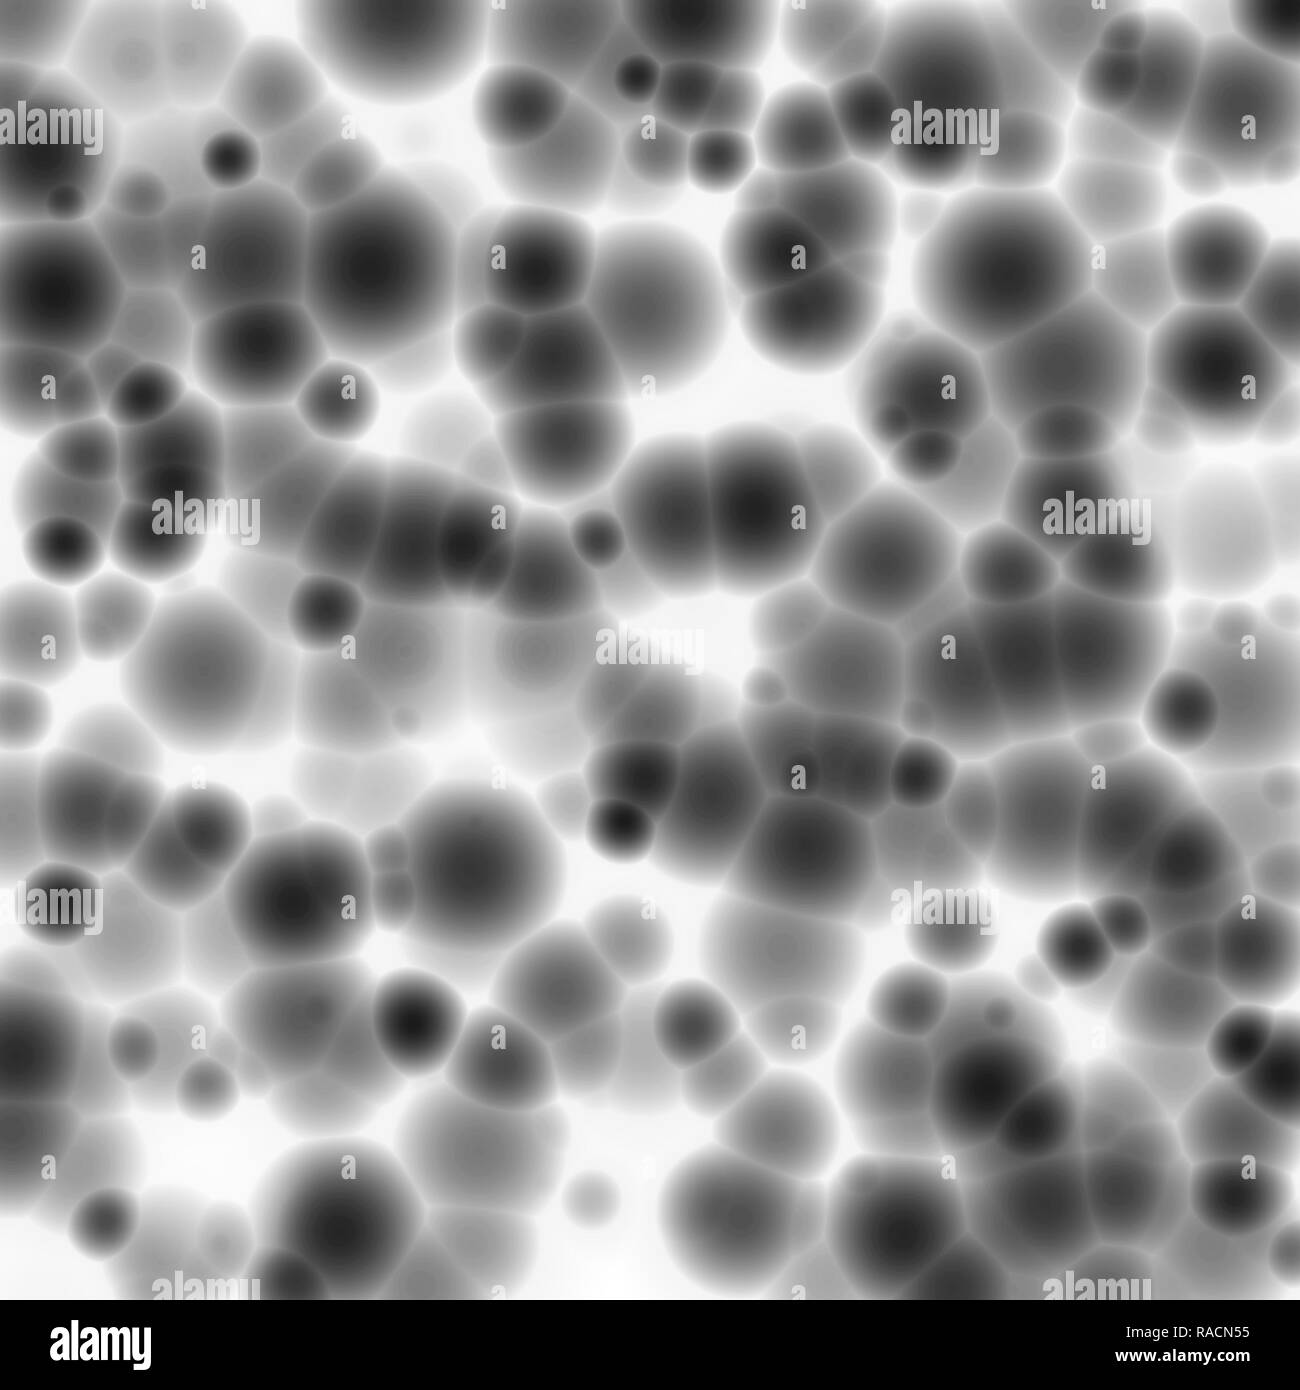 Black small cell under the microscope, abstract background Stock Photo